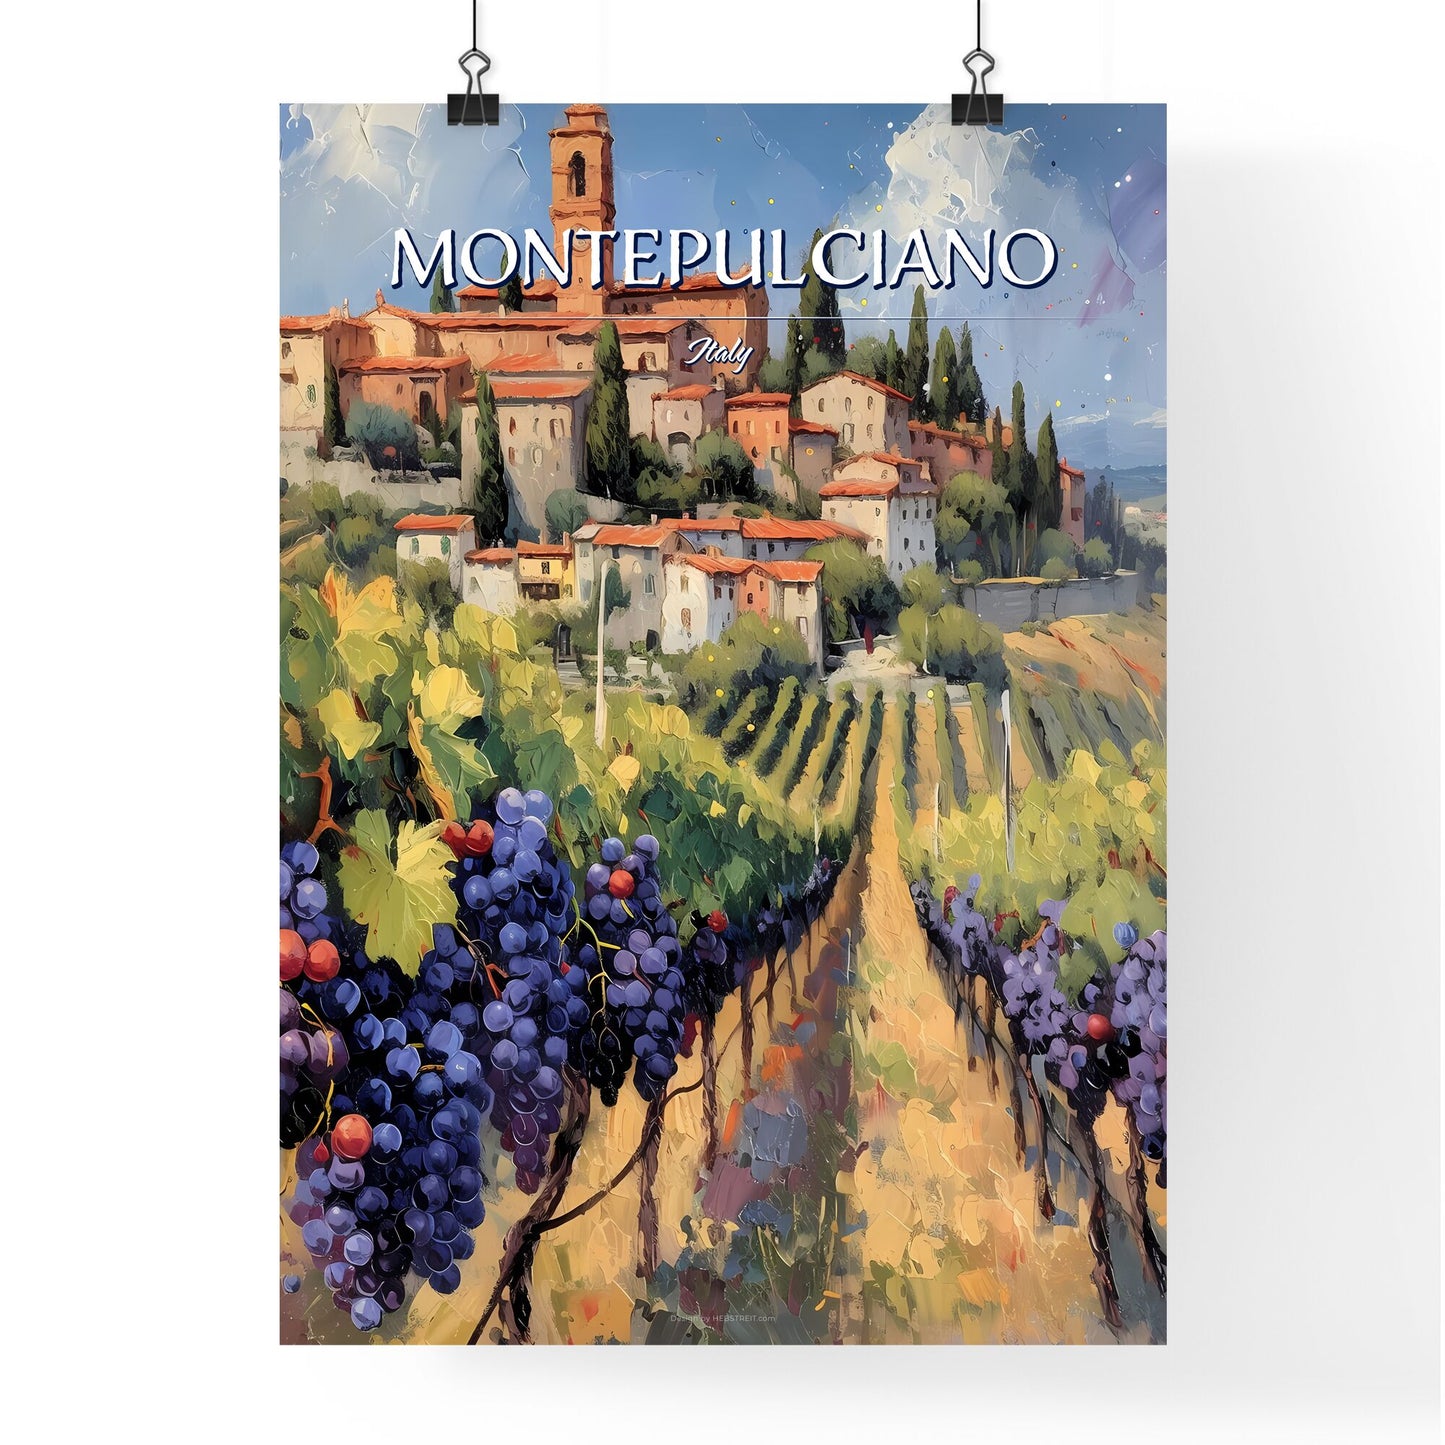 Montepulciano, Italy - Art print of a painting of a town with a vineyard and grapes Default Title